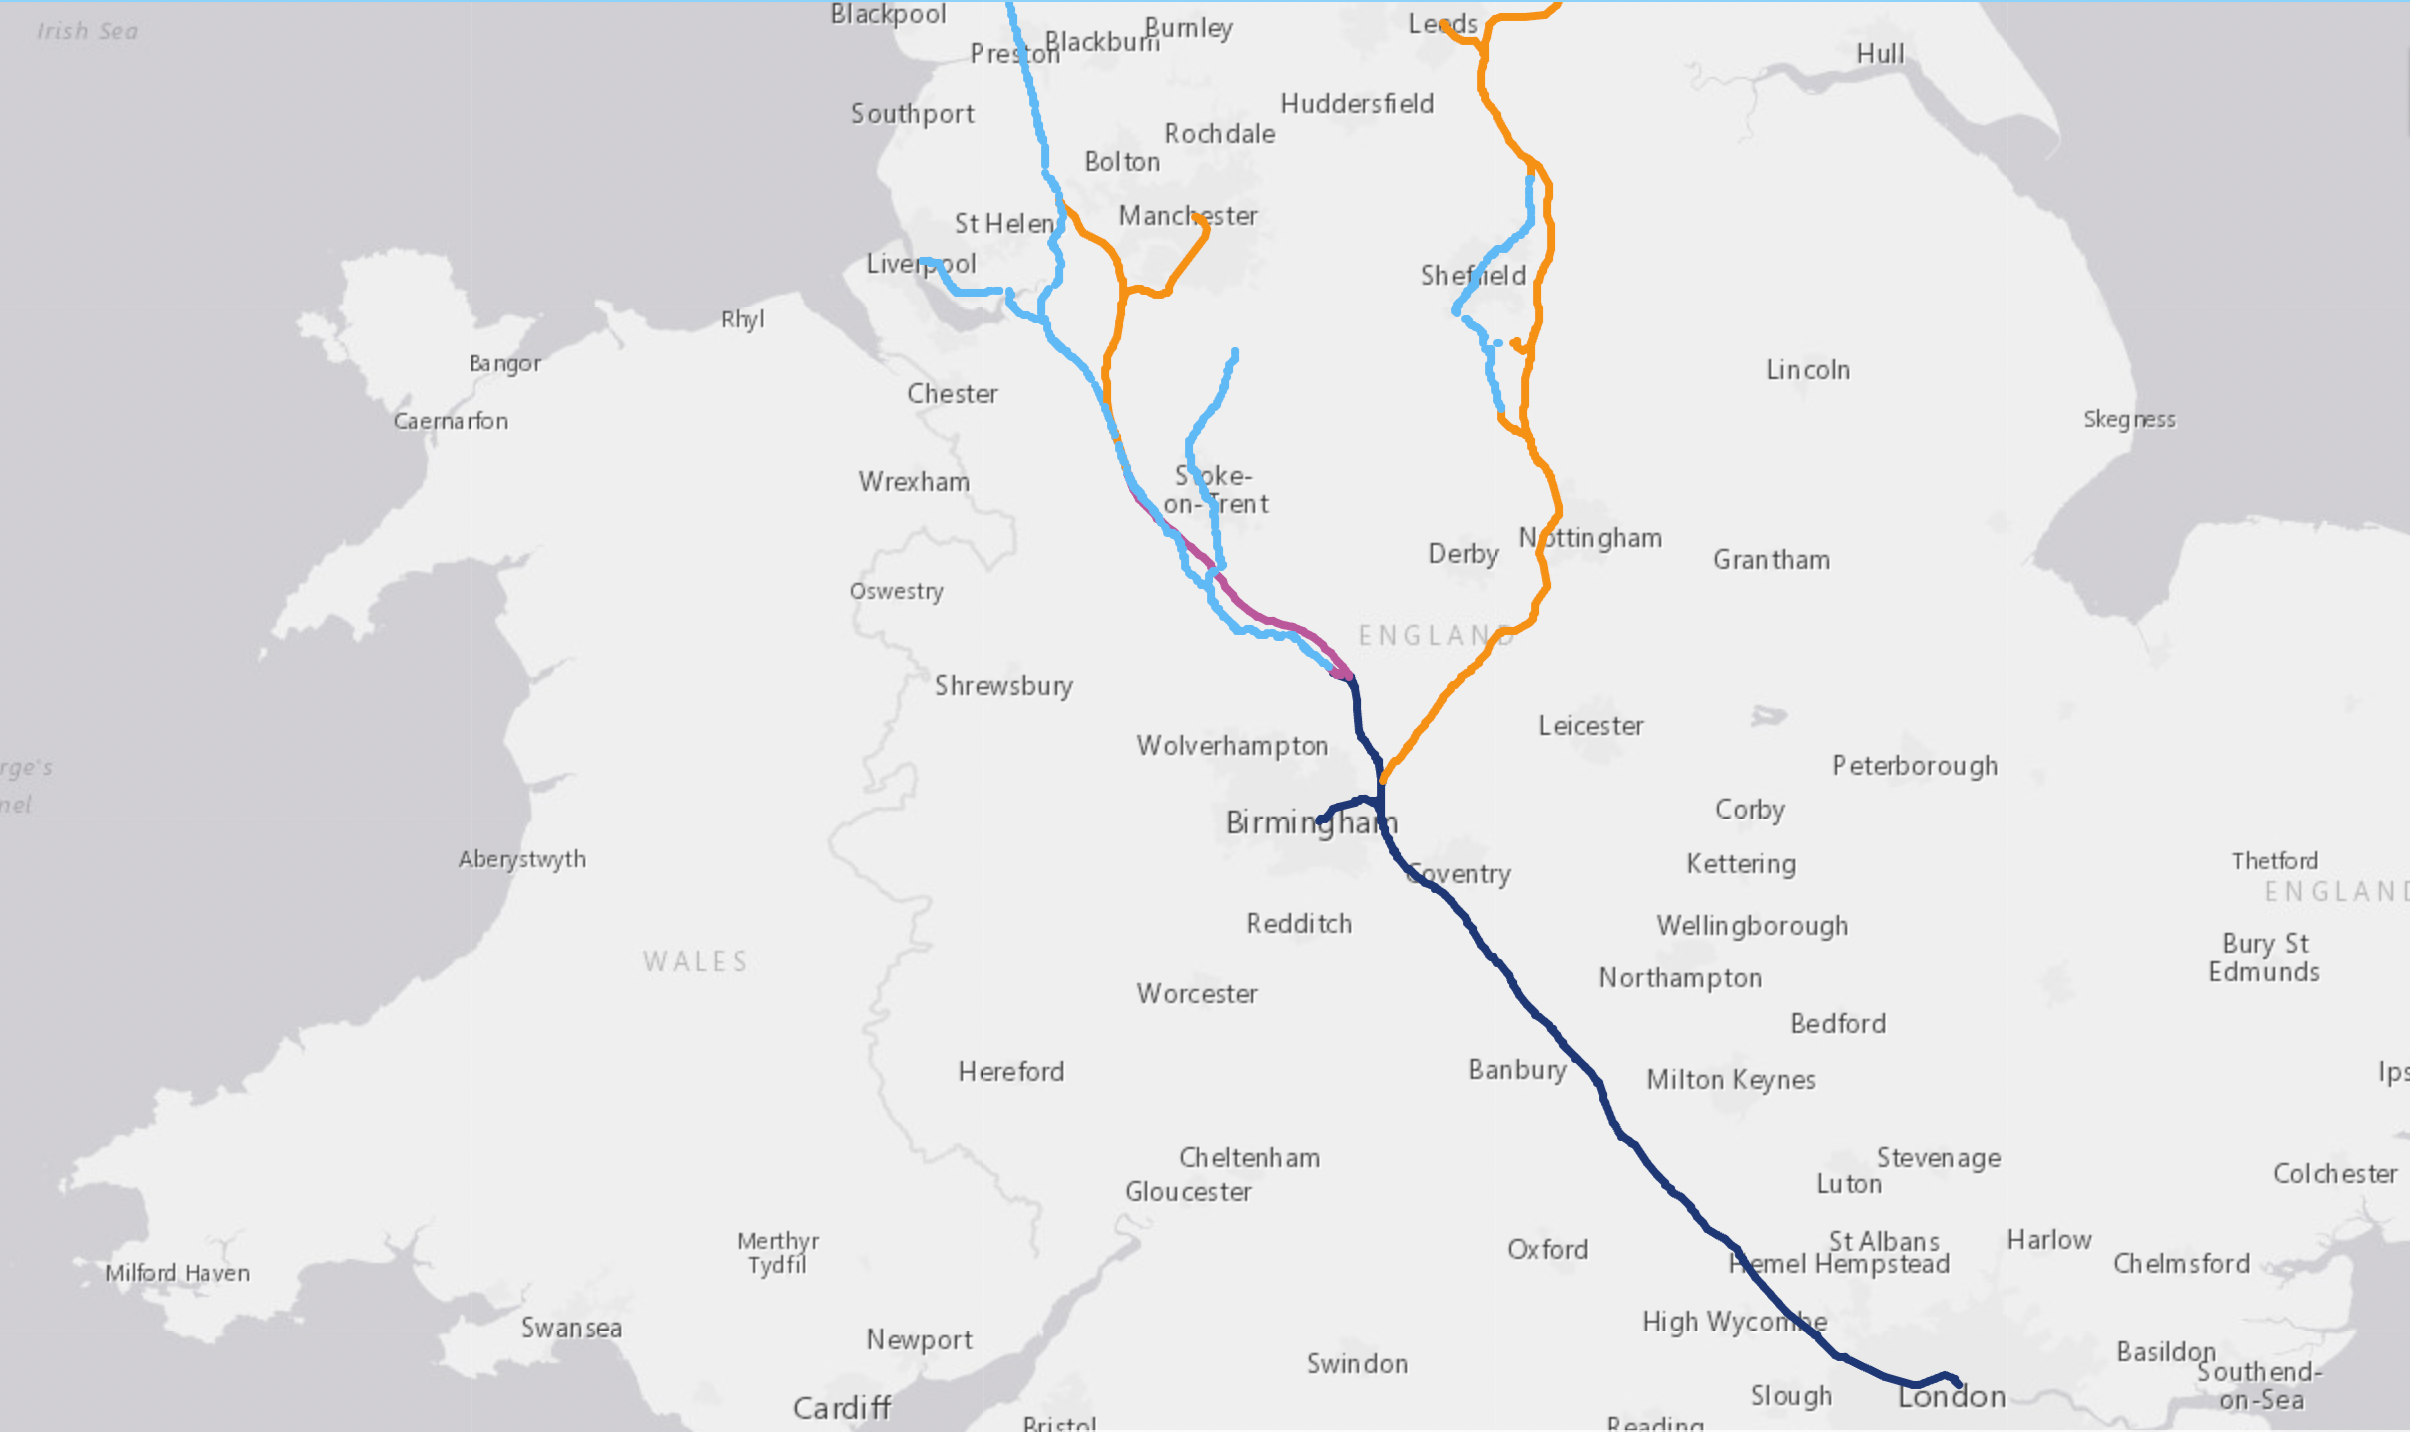 All stations? Official HS2 map showing the planned extension from Birmingham to Leeds via Nottingham and Sheffield